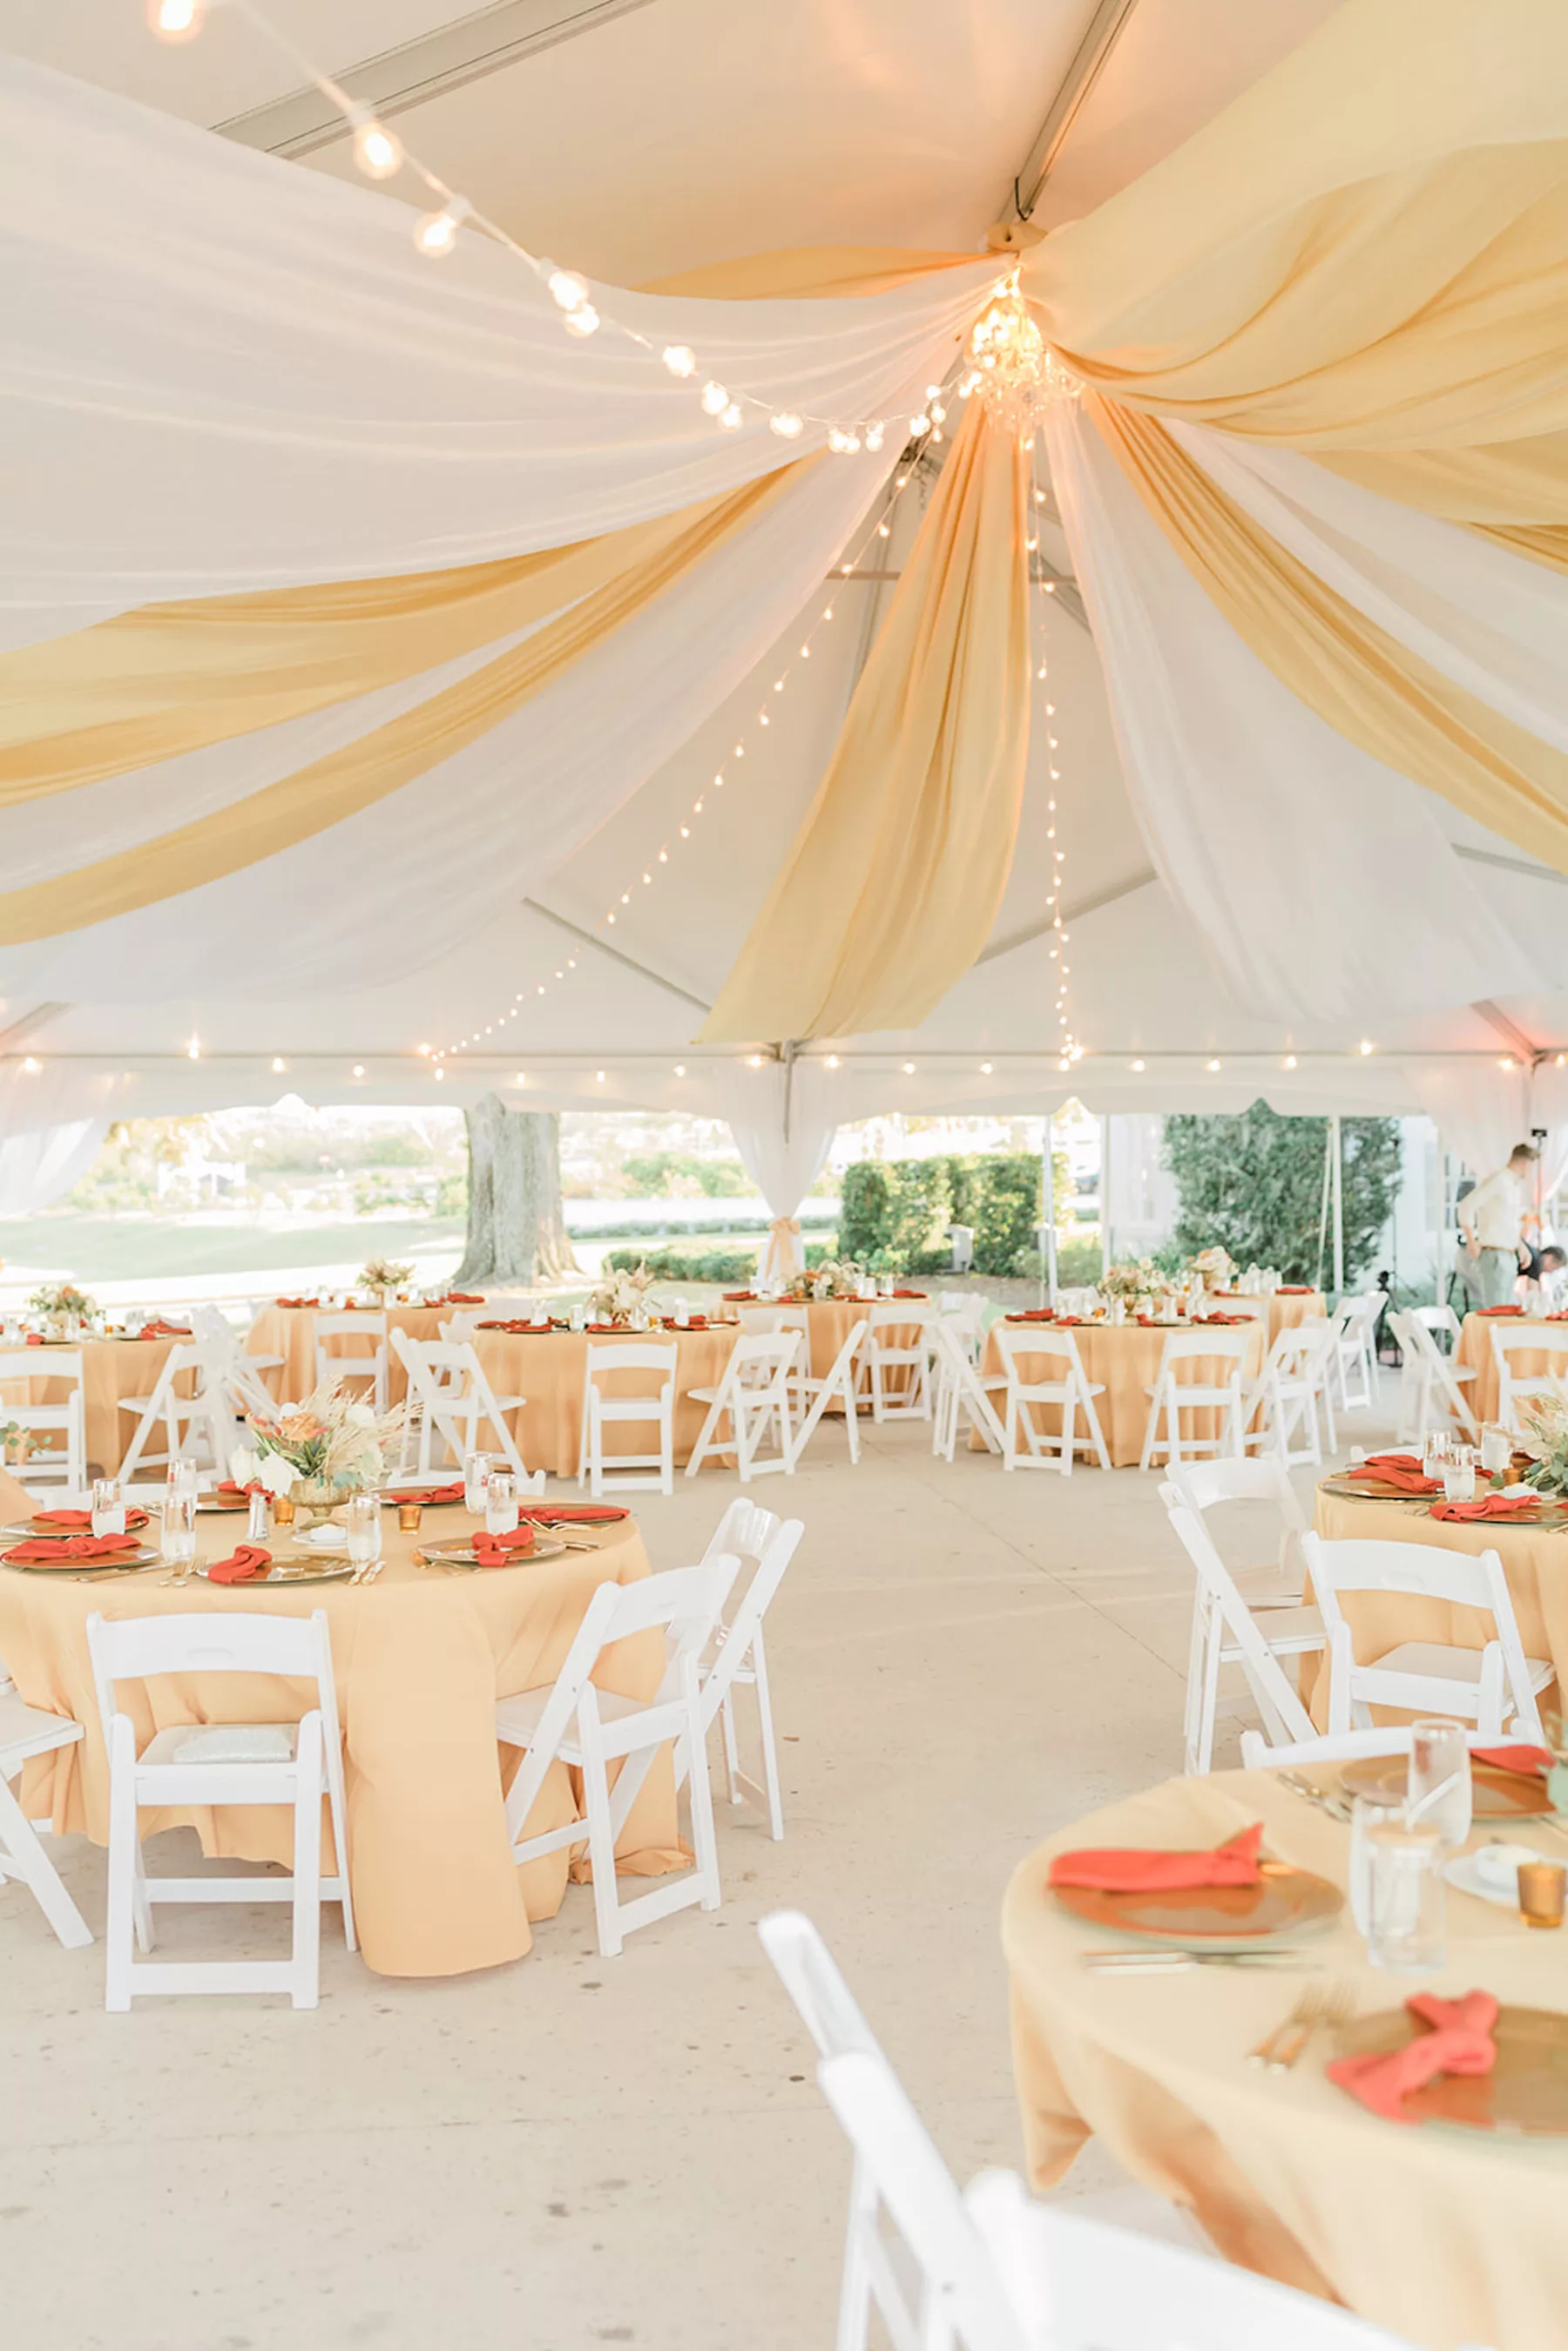 Neutral Boho Peach and Burnt Orange Tented Fall Wedding Reception Inspiration | Tampa Bay Planner B Eventful